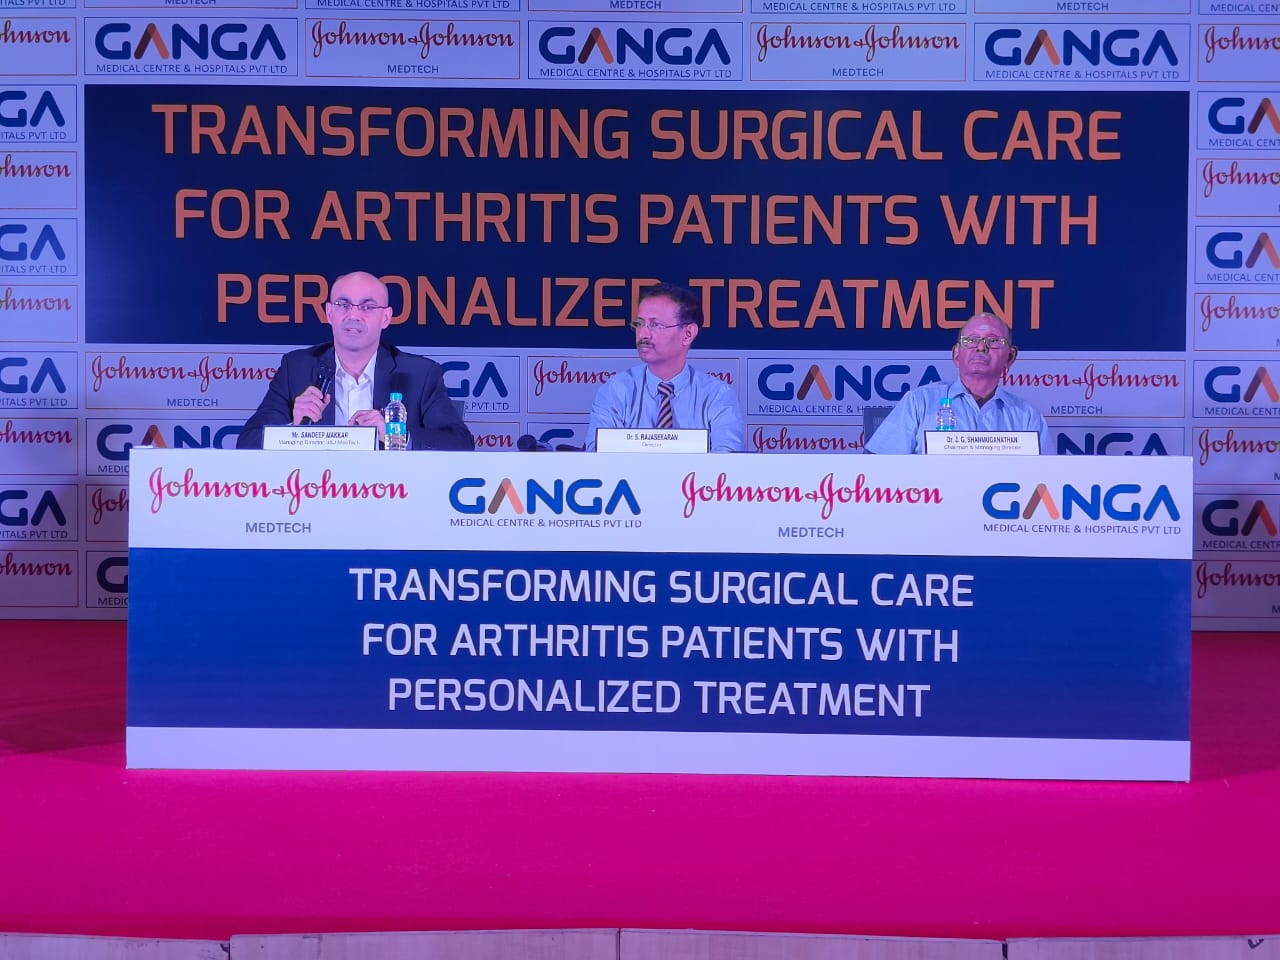 TRANSFORMING SURGICAL CARE FOR ARTHRITIS PATIENTS WITH PERSONALIZED TREATMENT